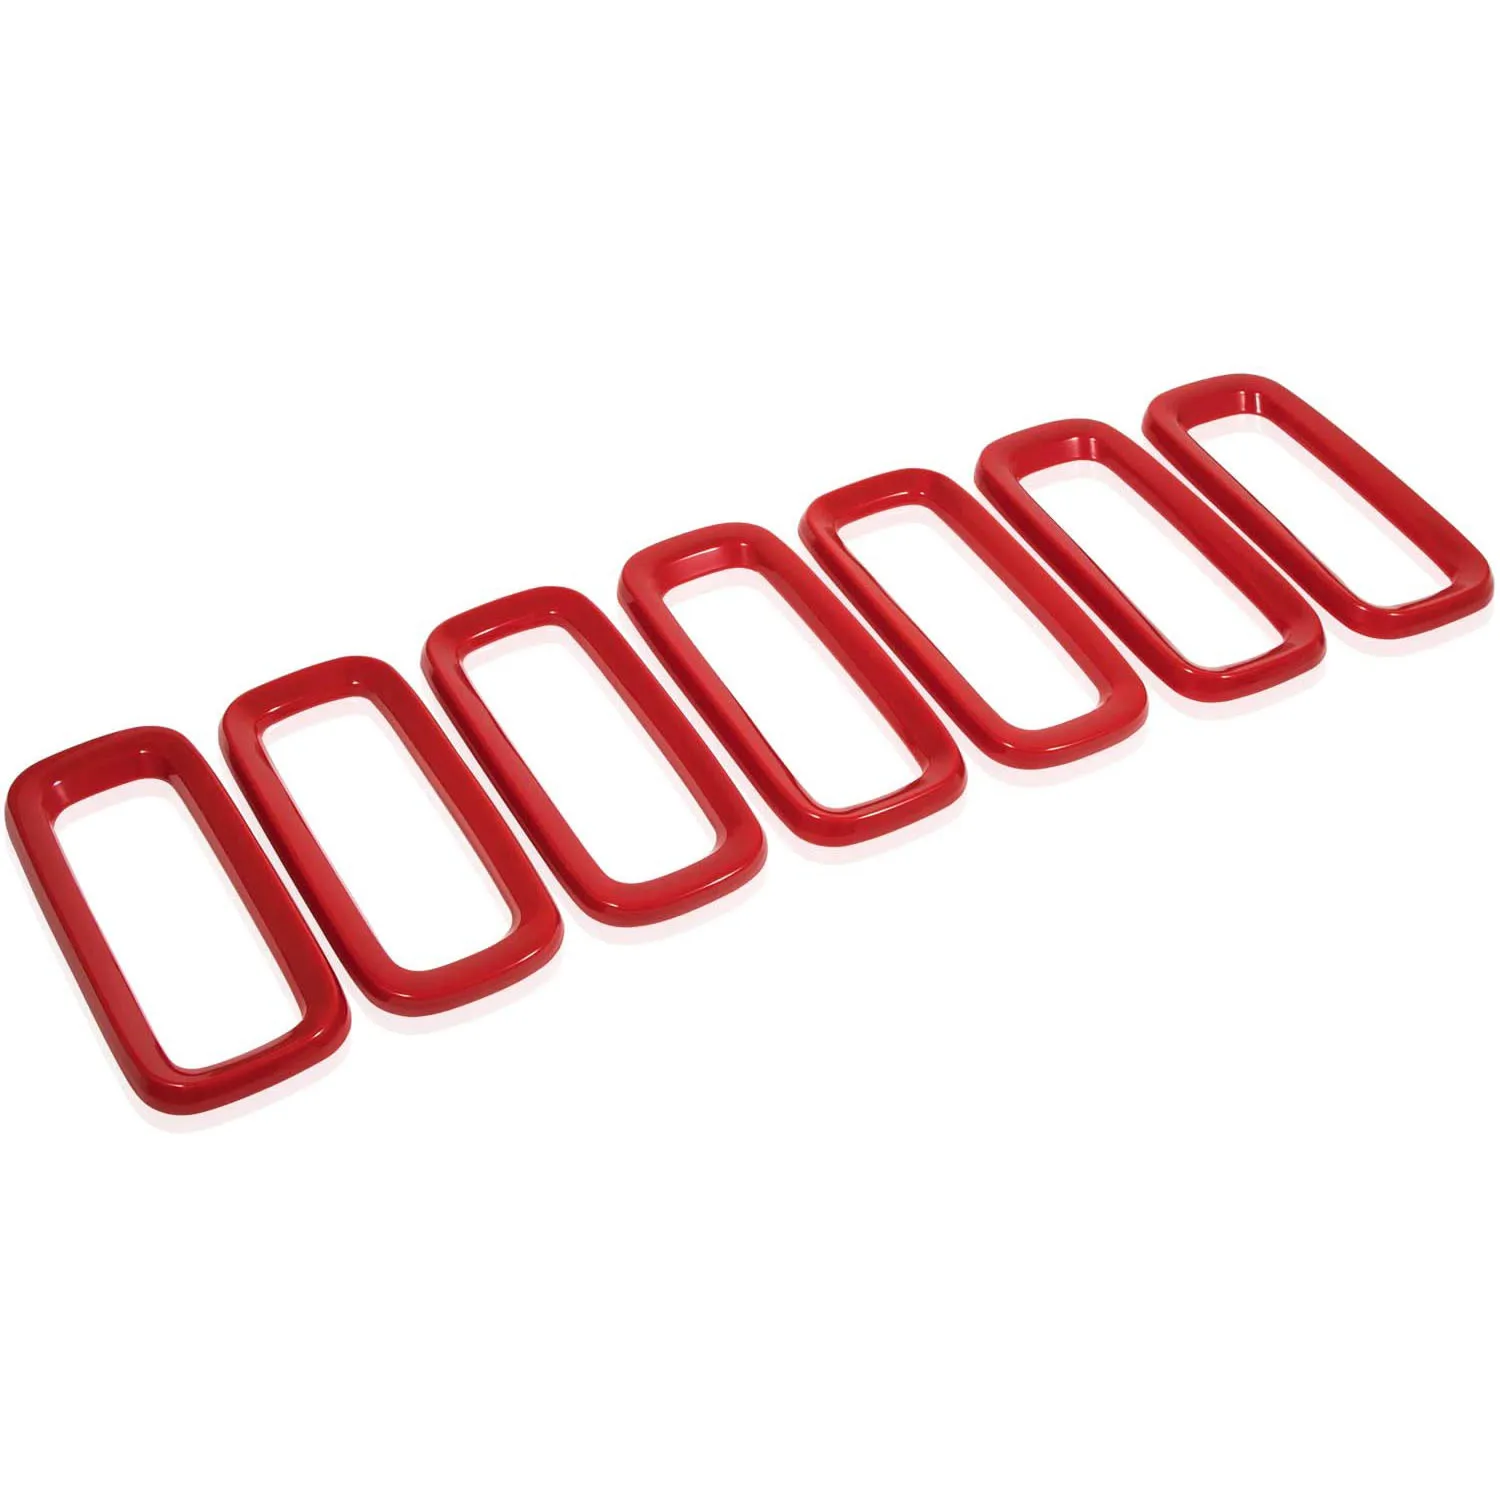 

7Pcs Car ABS Front Grill Grille Inserts Mesh Grill Guard Cover Trim Red for Jeep Renegade 2015-2018